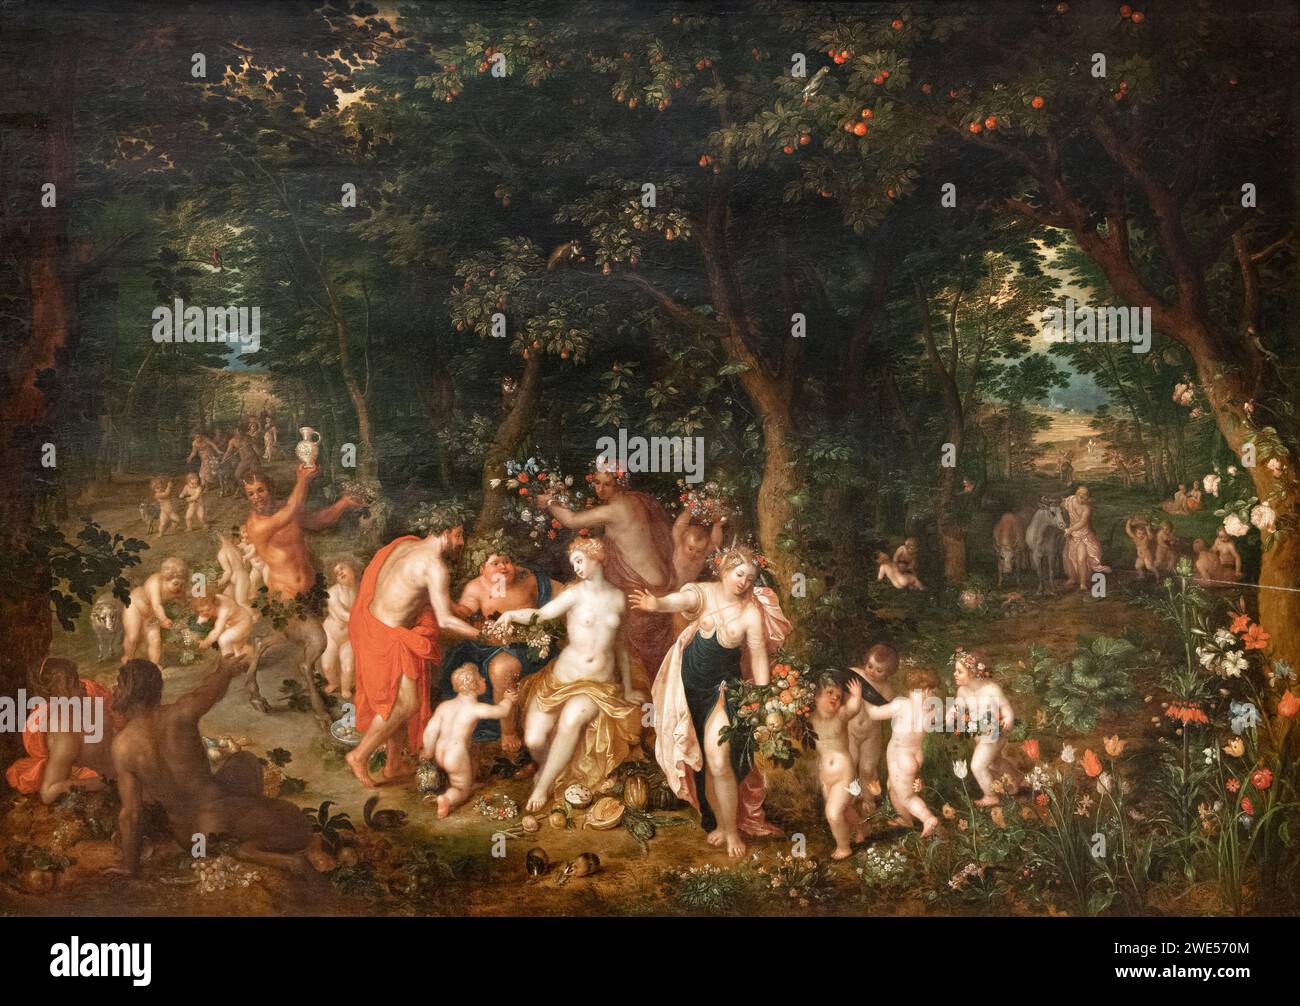 Jan Brueghel the Younger painting, 'The Feast of Bacchus', pre 1632. Flemish Baroque painting. 17th century flemish baroque painter. Stock Photo